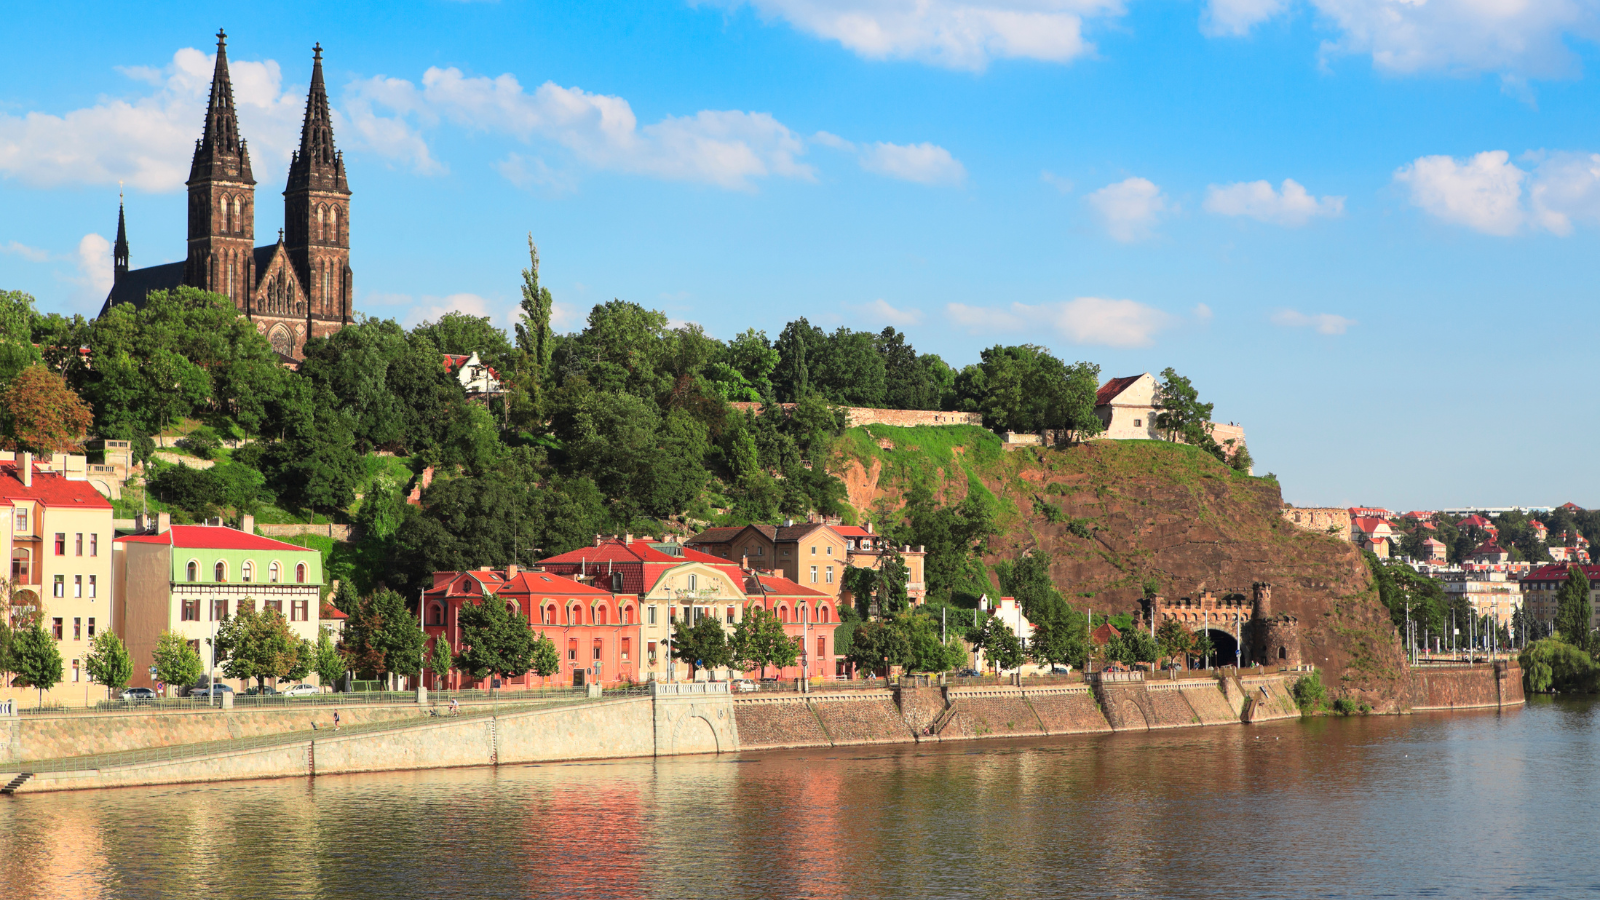 Sixth option in the list of 10 options to see in Prague in 1 day - Vyšehrad Fortress